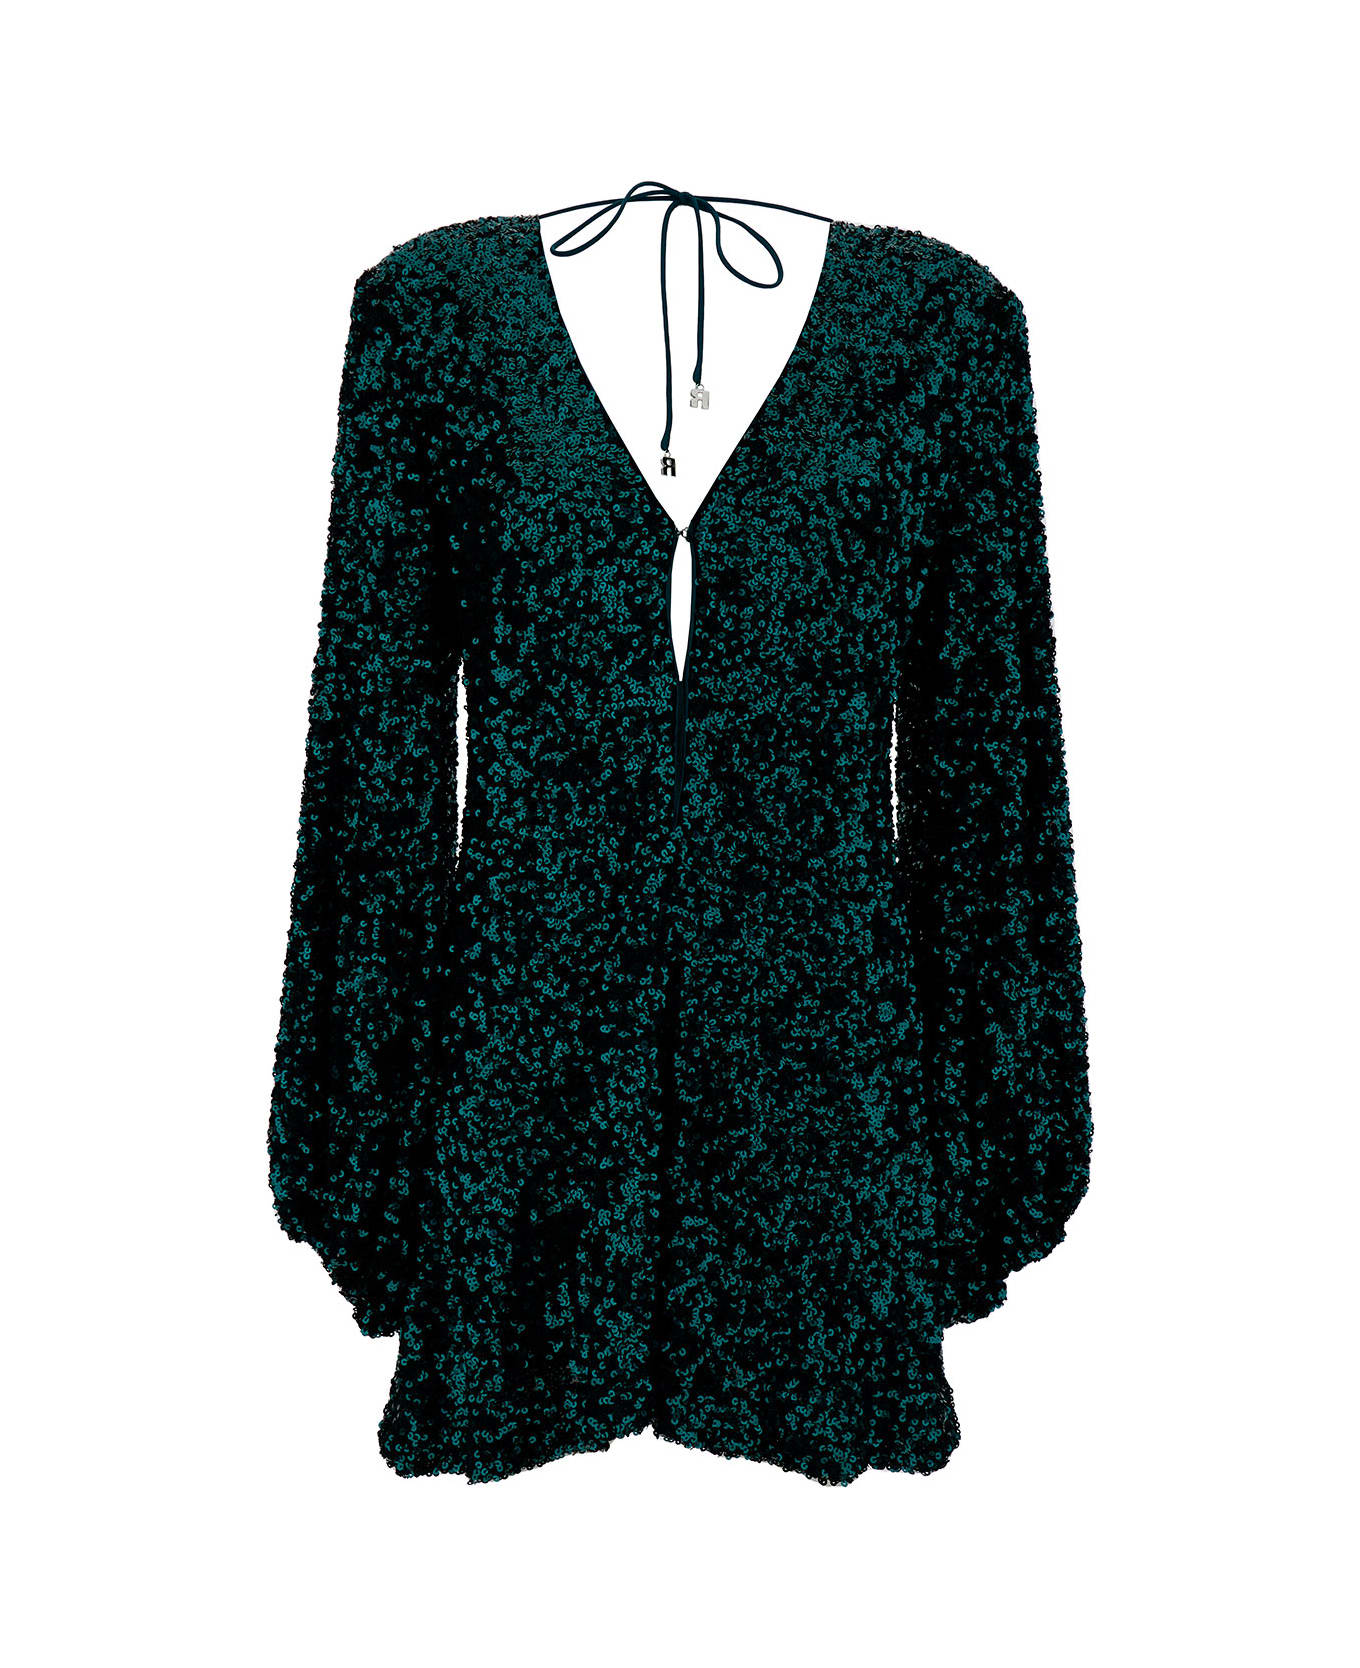 Rotate by Birger Christensen Mini Green Dress With V Neckline And All-over Paillettes In Recycled Fabric Woman - Green